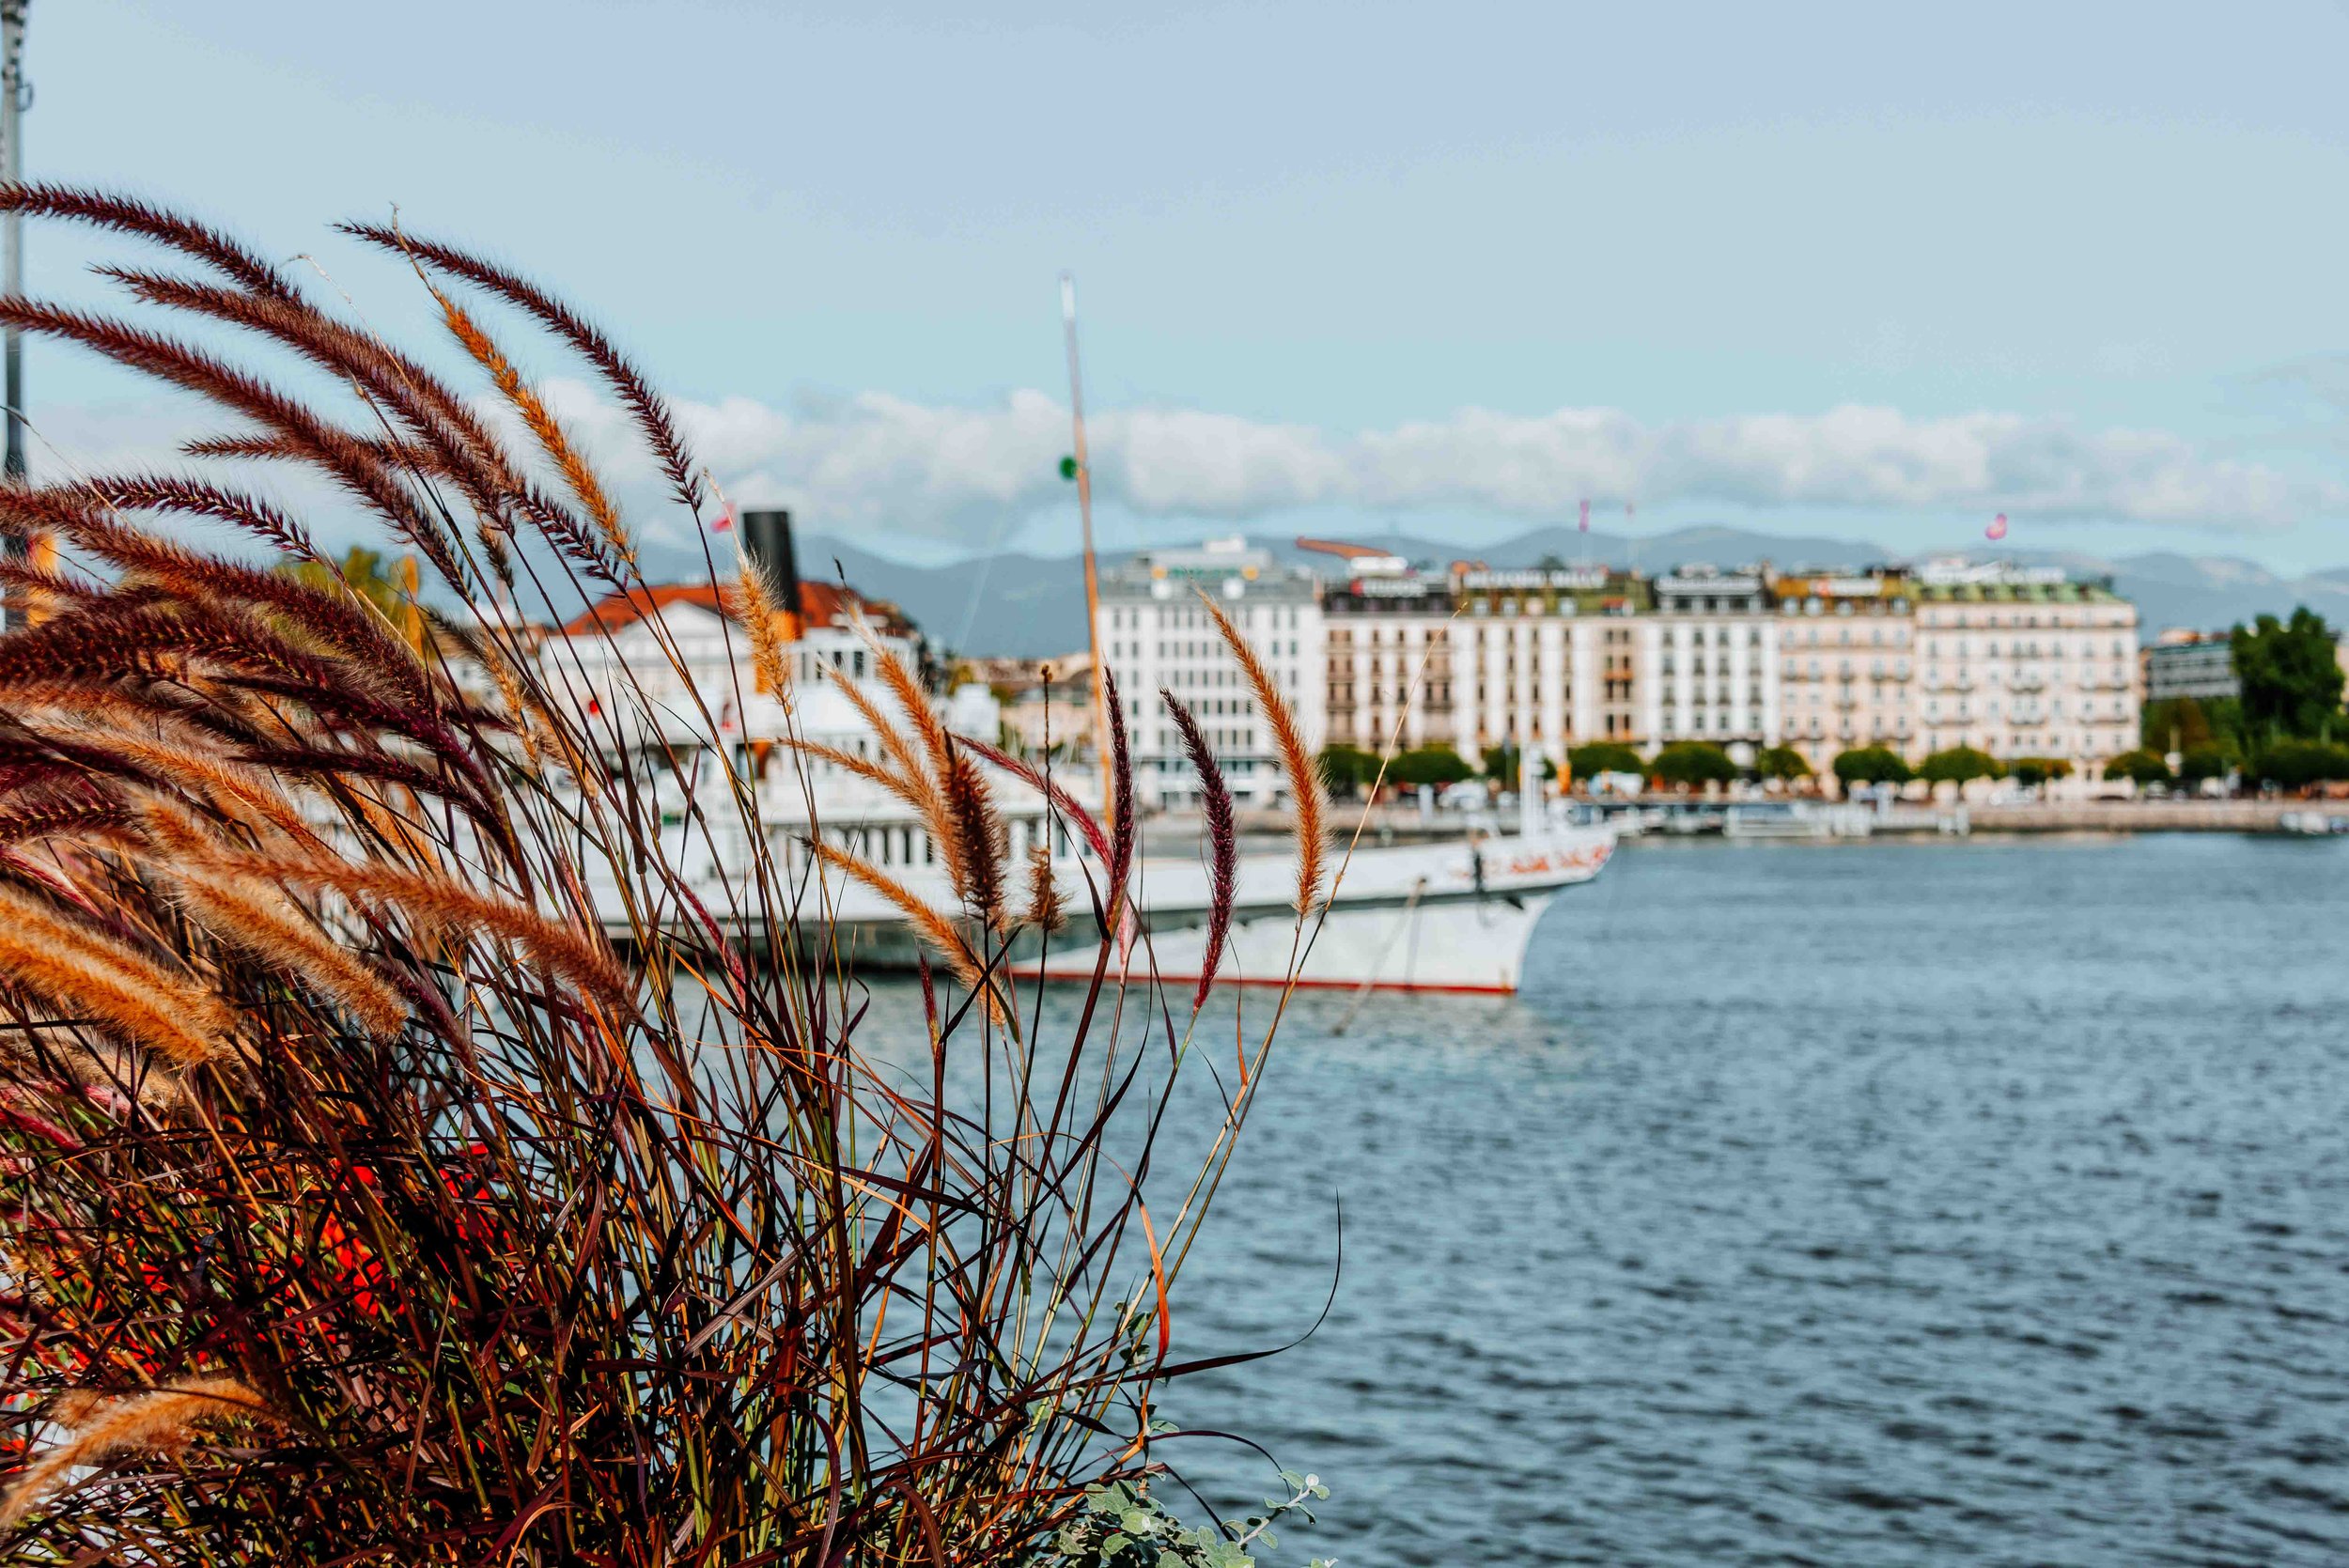 Cruise ships on lake Lucerne on how many days to spend in lucerne